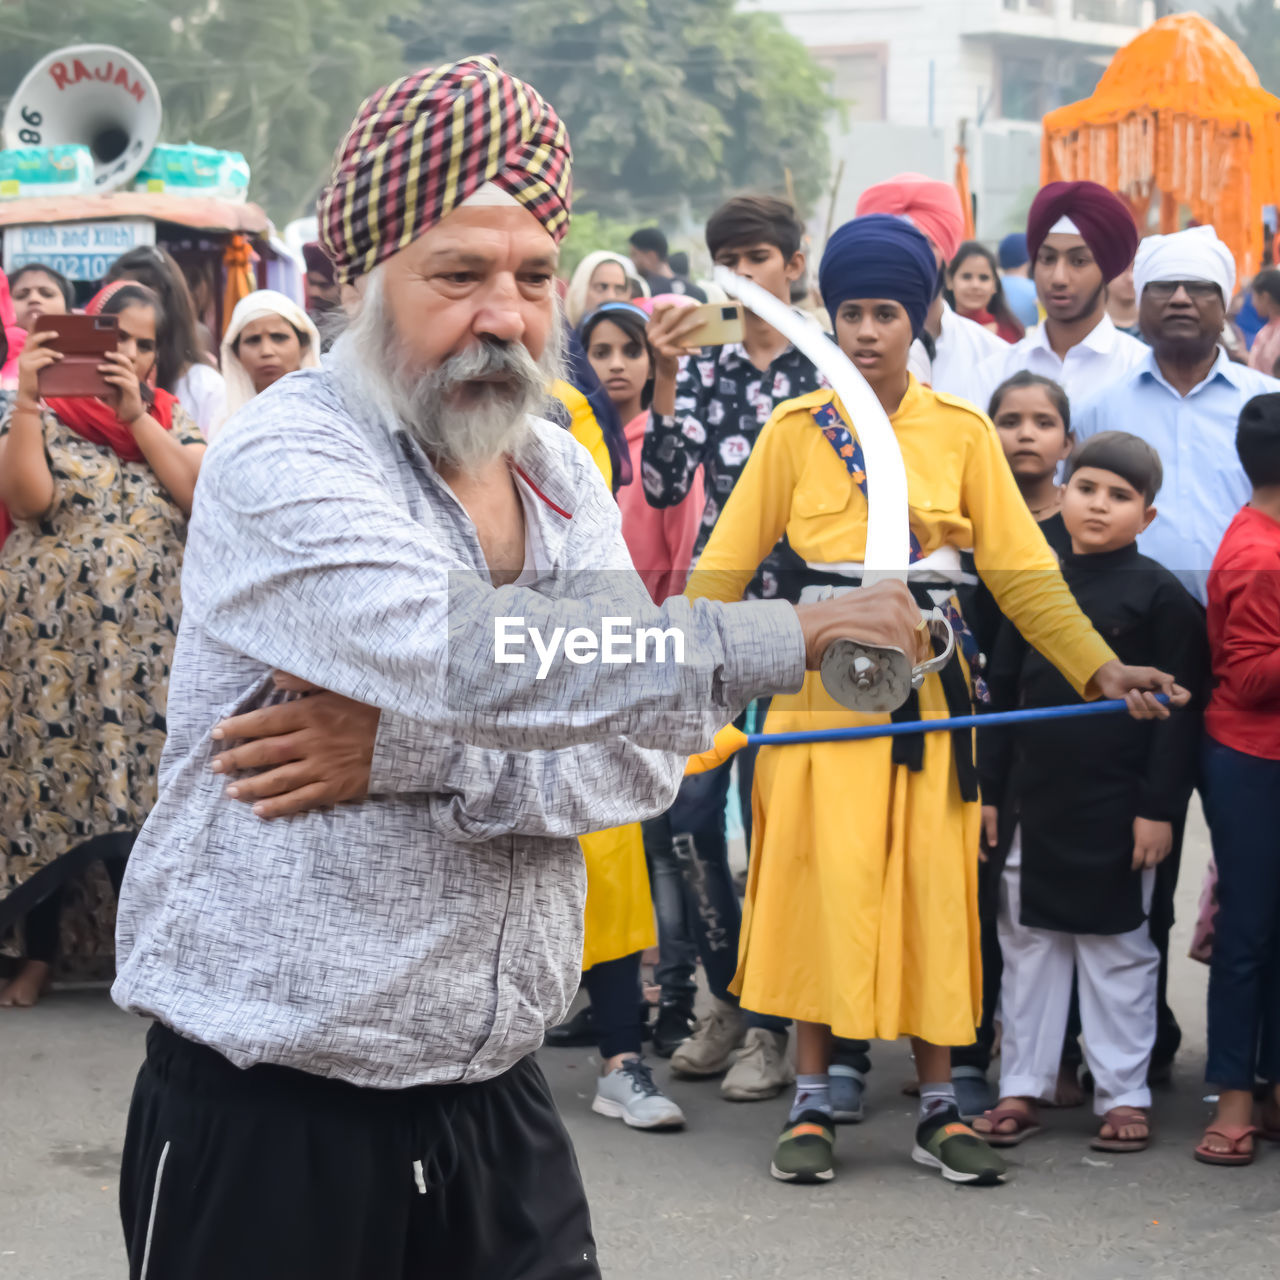 group of people, men, crowd, adult, large group of people, women, city, street, festival, architecture, celebration, standing, arts culture and entertainment, clothing, person, event, smiling, happiness, togetherness, day, emotion, female, outdoors, lifestyles